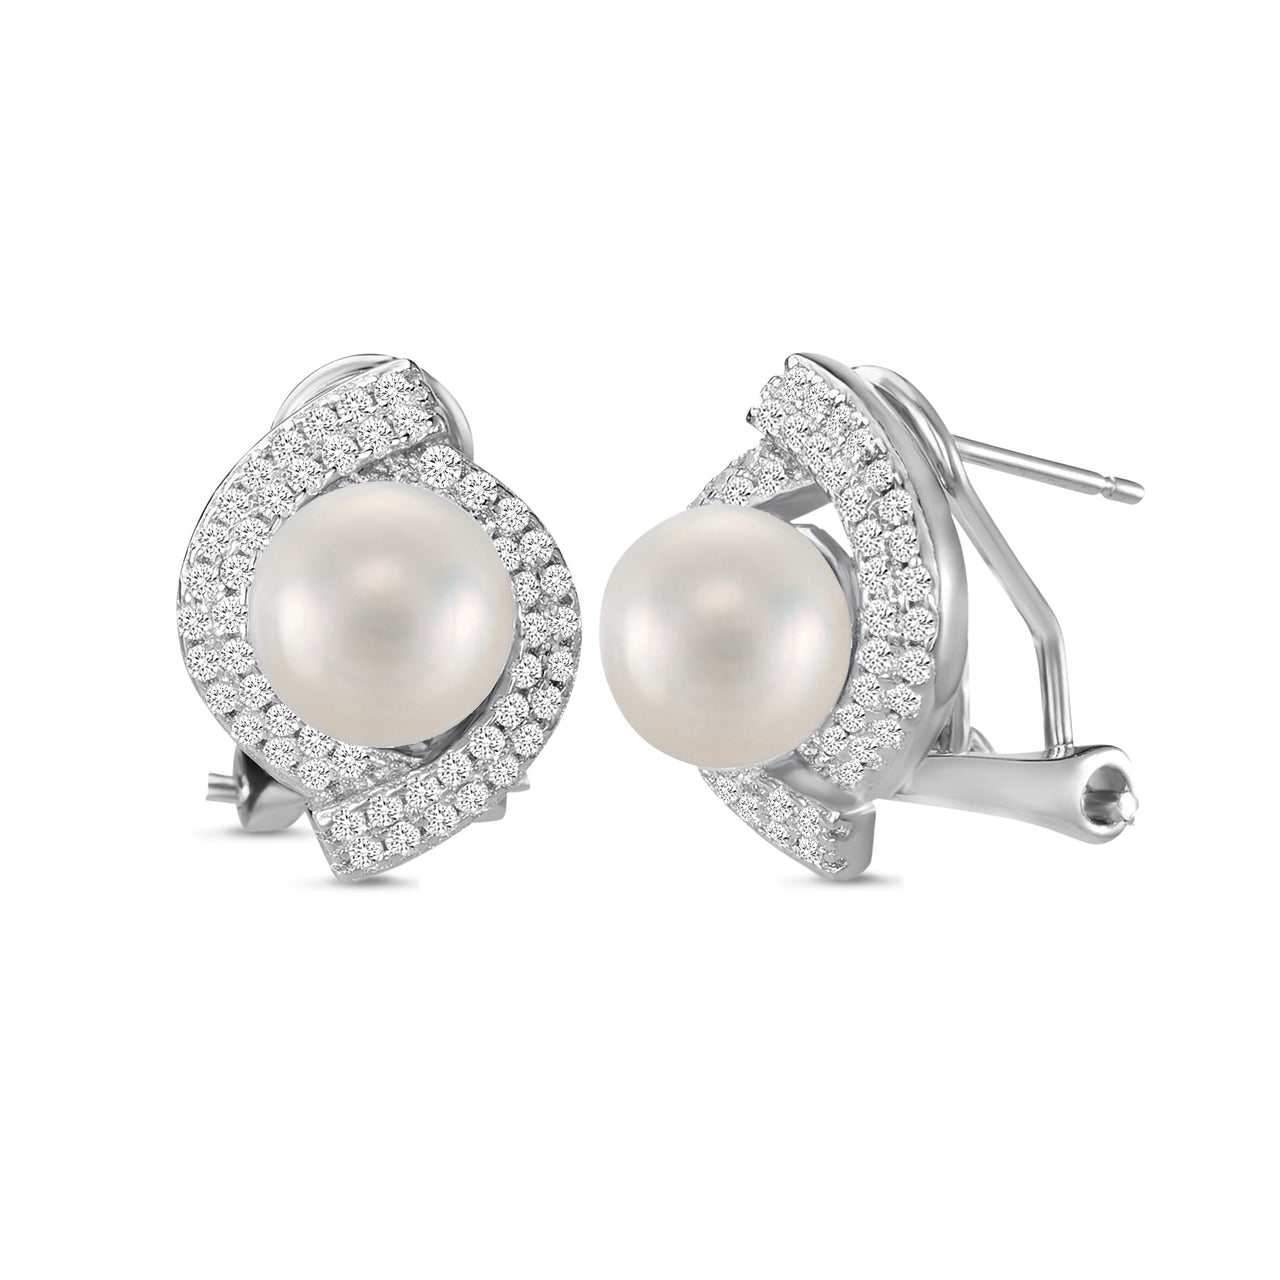 Lesa Michele Rhodium Plated Sterling Silver Simulated Pearl Cubic Zirconia Unique Earrings